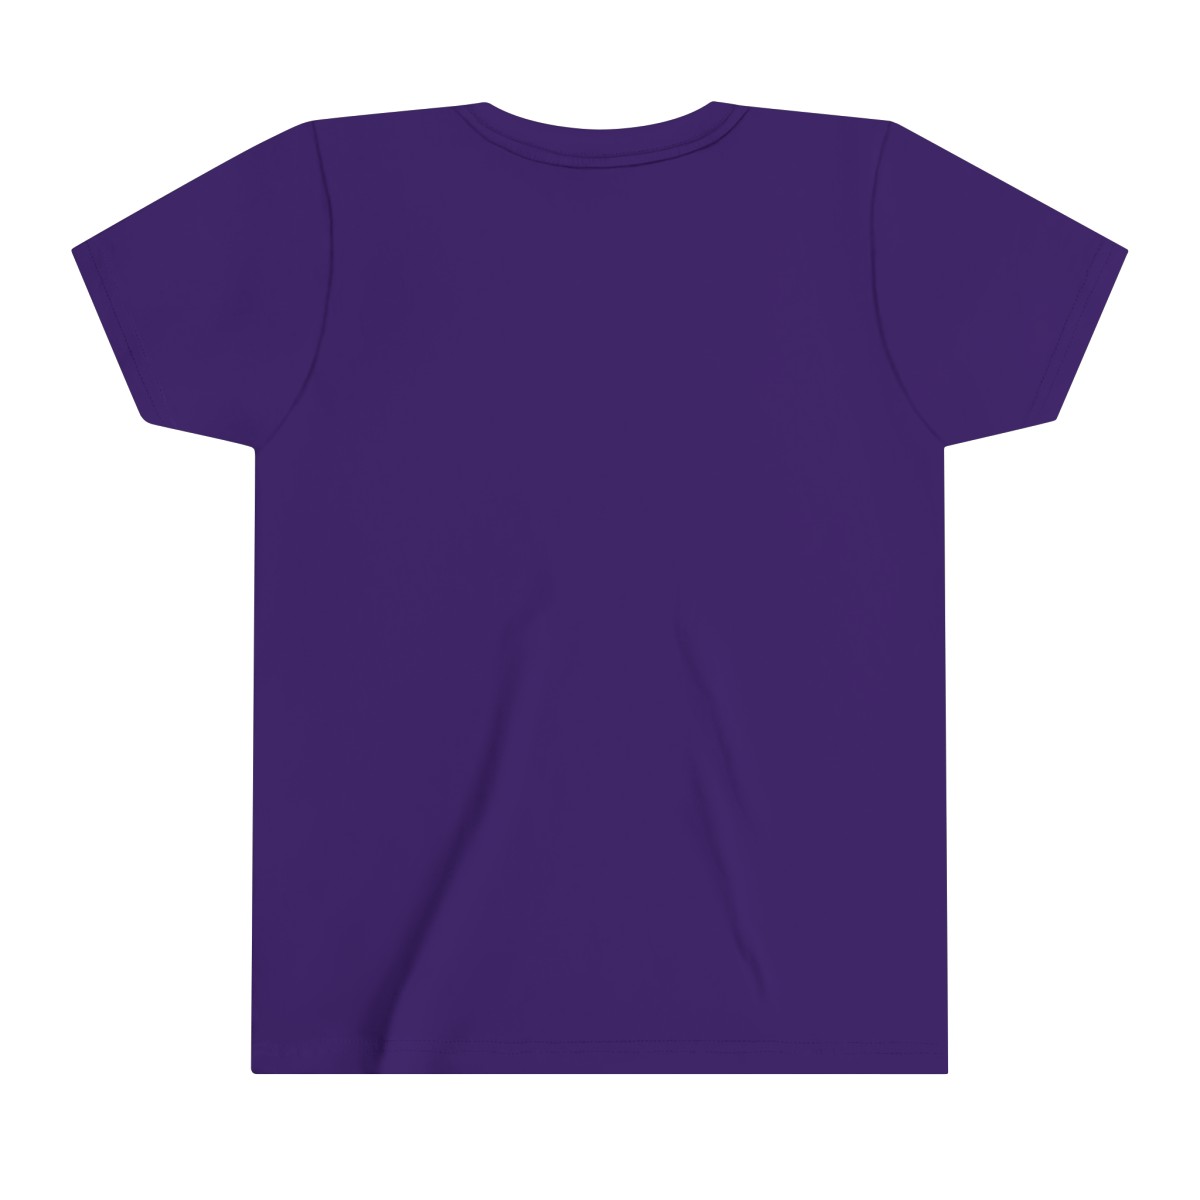 Youth Sizes - -ll That Dance Tshirts product thumbnail image